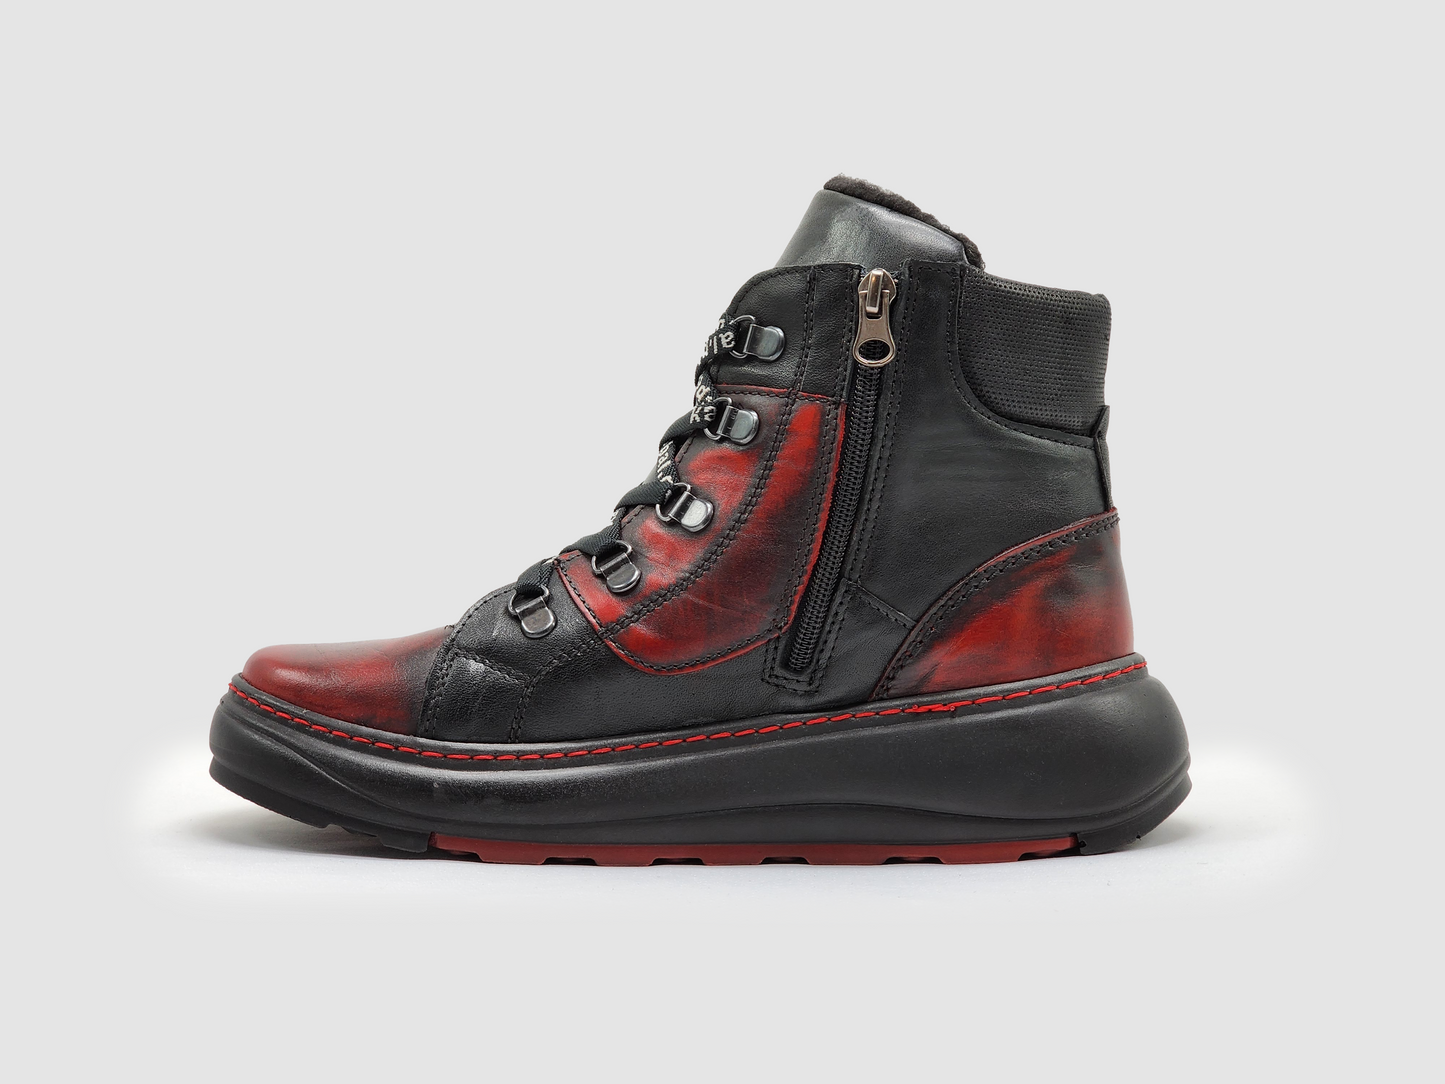 Women's Retro Thick Wool-Lined Leather Boots - Black & Red - Kacper Global Shoes 